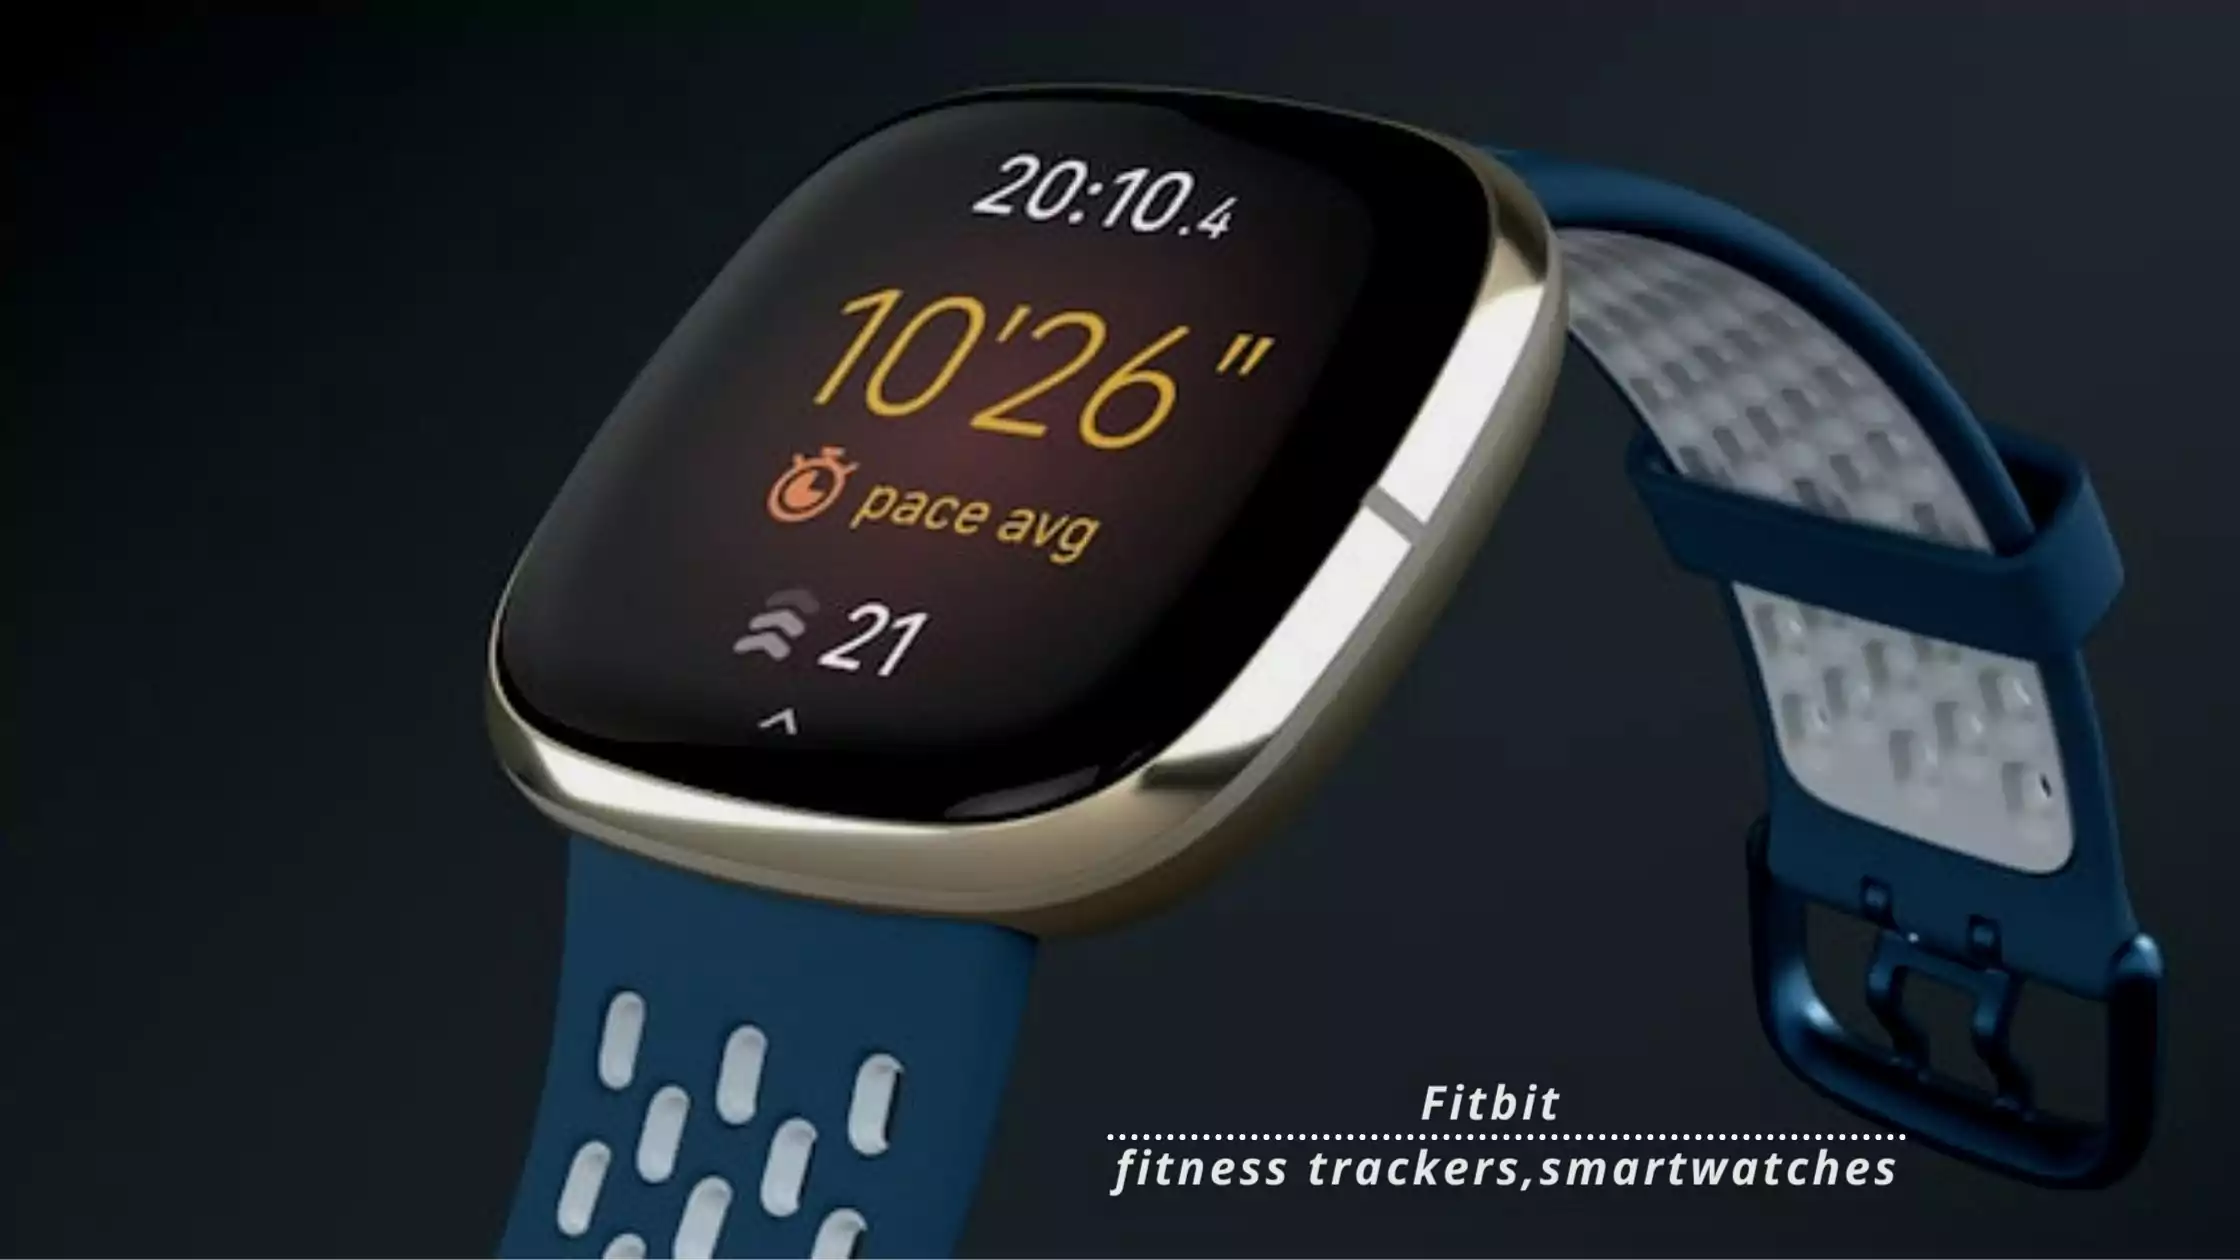 Fitbit fitness trackers smartwatches at low price